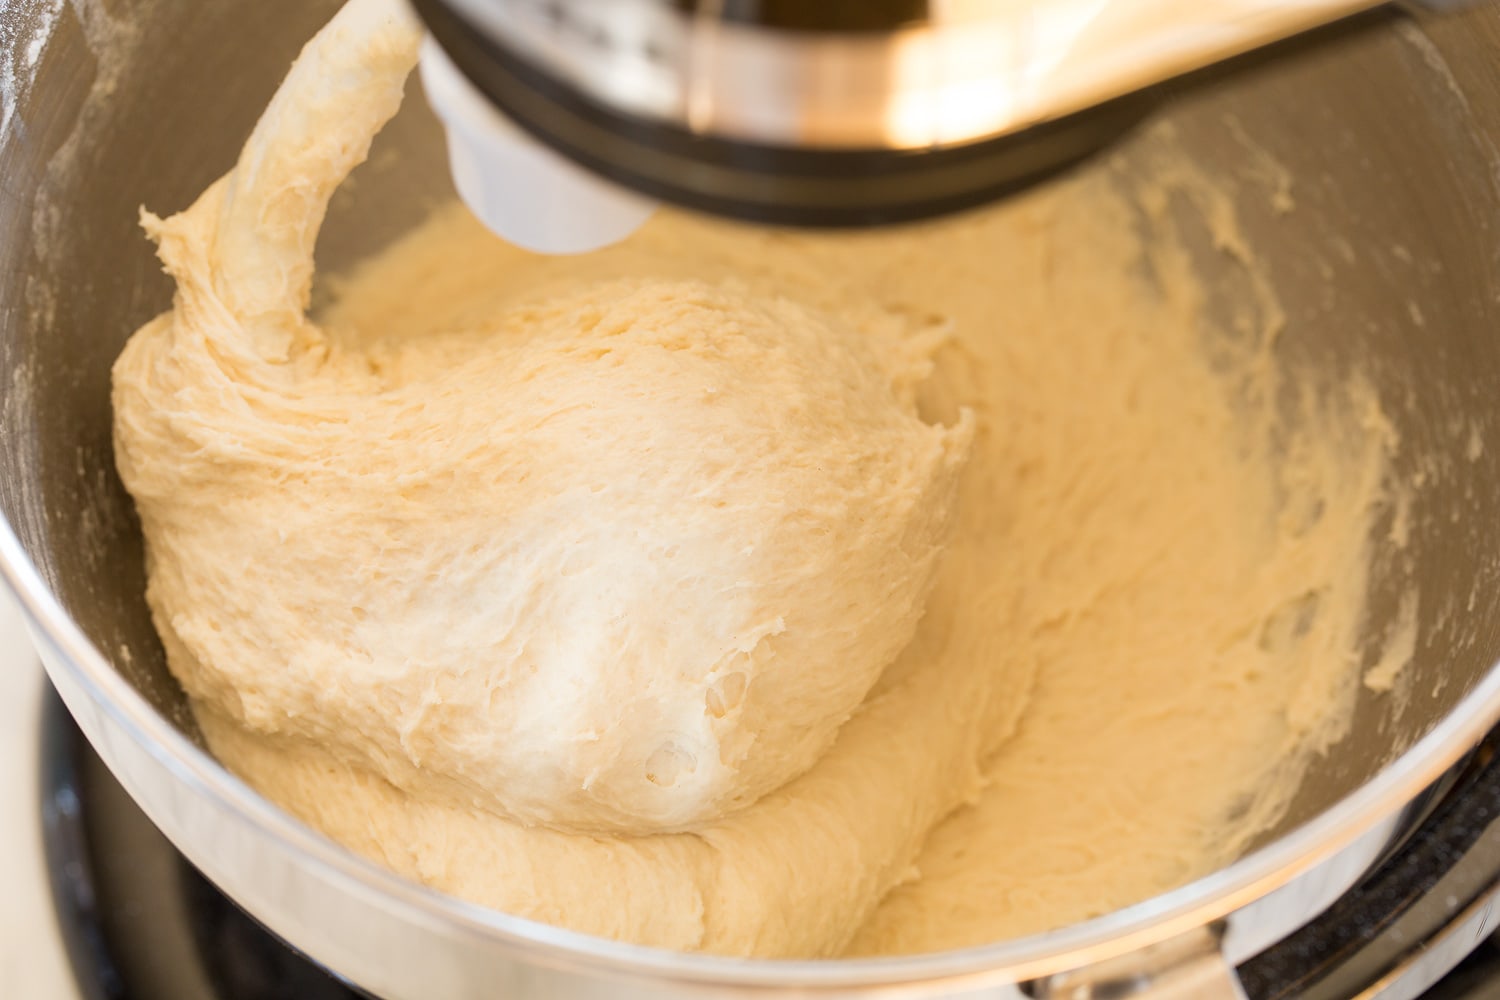 Kneaded roll dough in stand mixer.